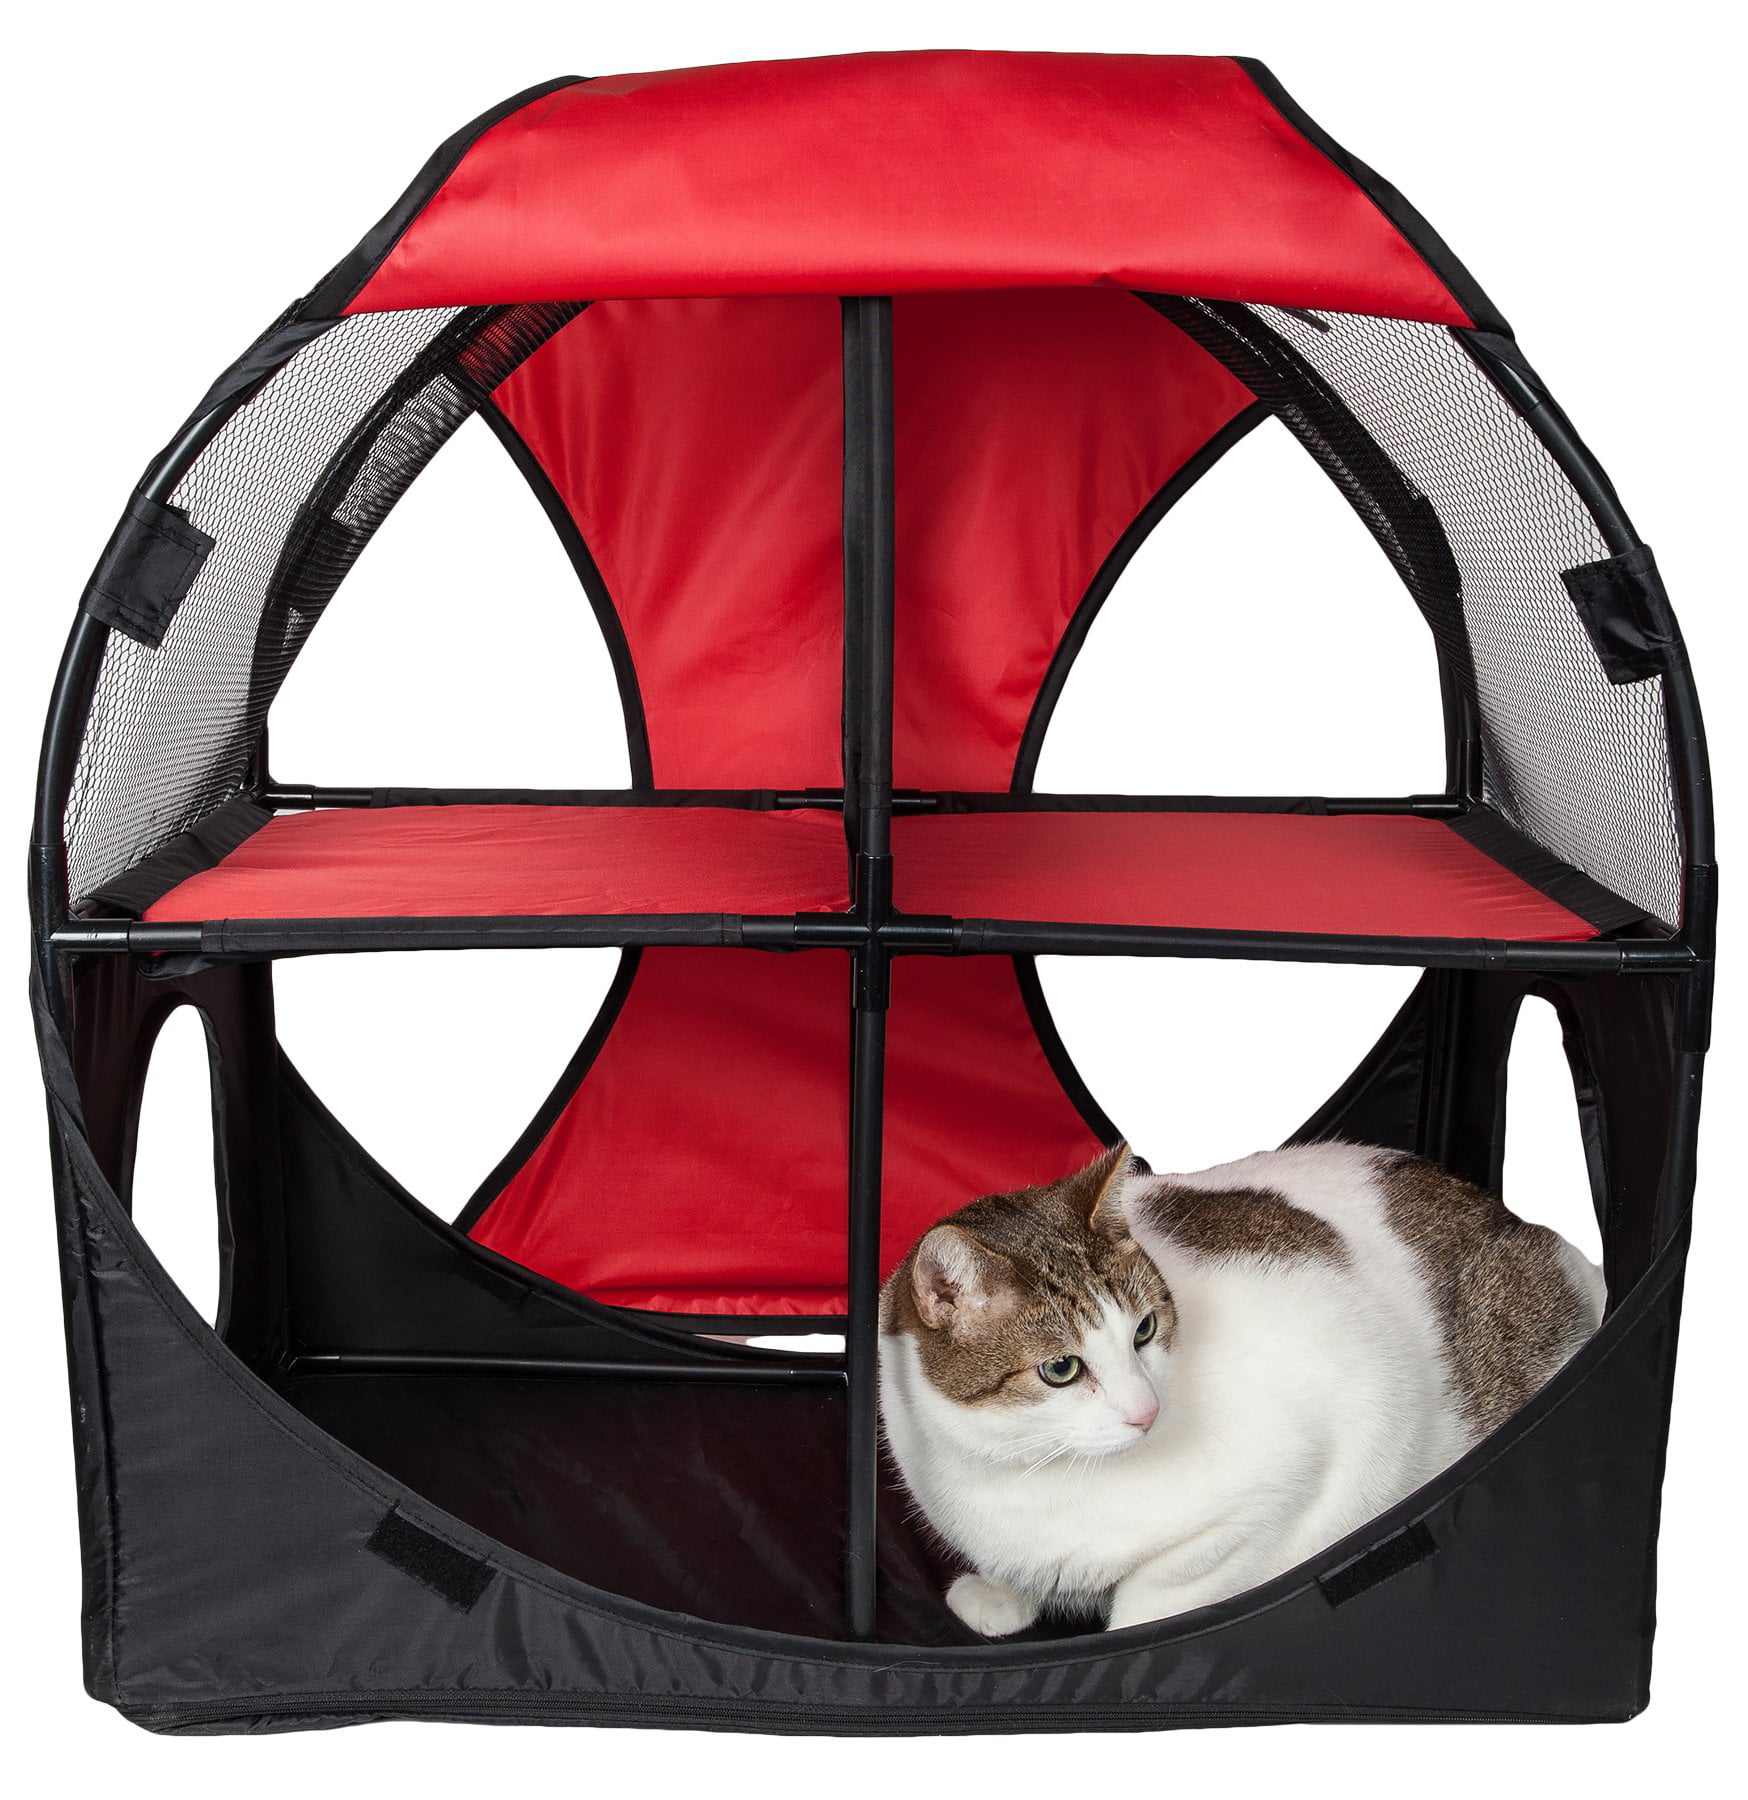 Pet Life Kitty-Play Obstacle Travel Collapsible Soft Folding Pet Cat House 